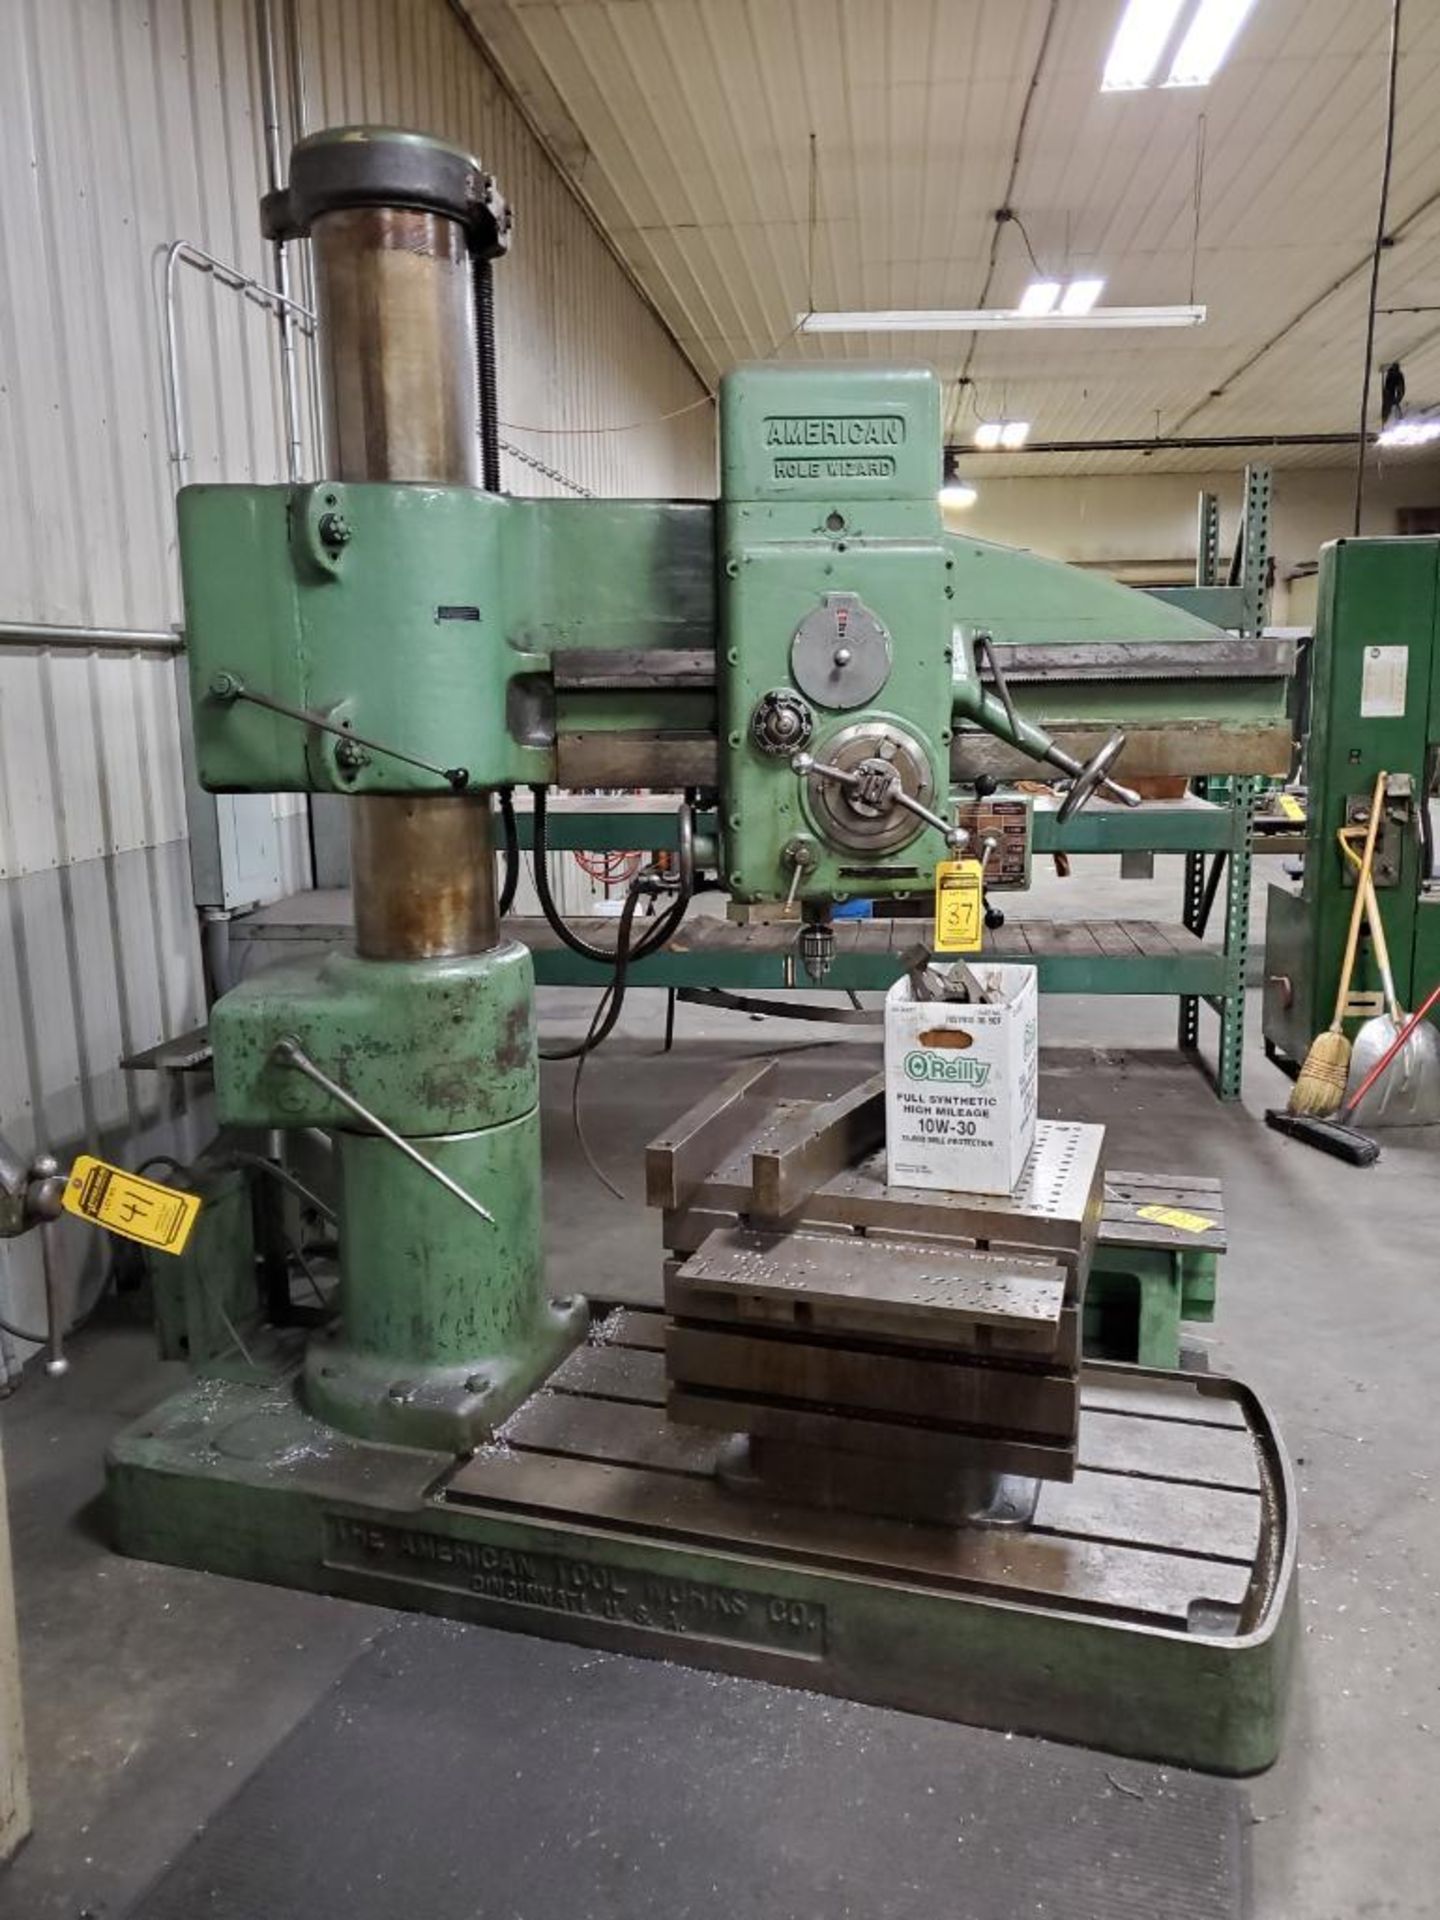 AMERICAN HOLE WIZARD RADIAL ARM DRILL, 4' ARM, 11'' COLUMN, 70-2100 SPINDLE RPM, 55'' X 36'' FOOT BE - Image 2 of 9